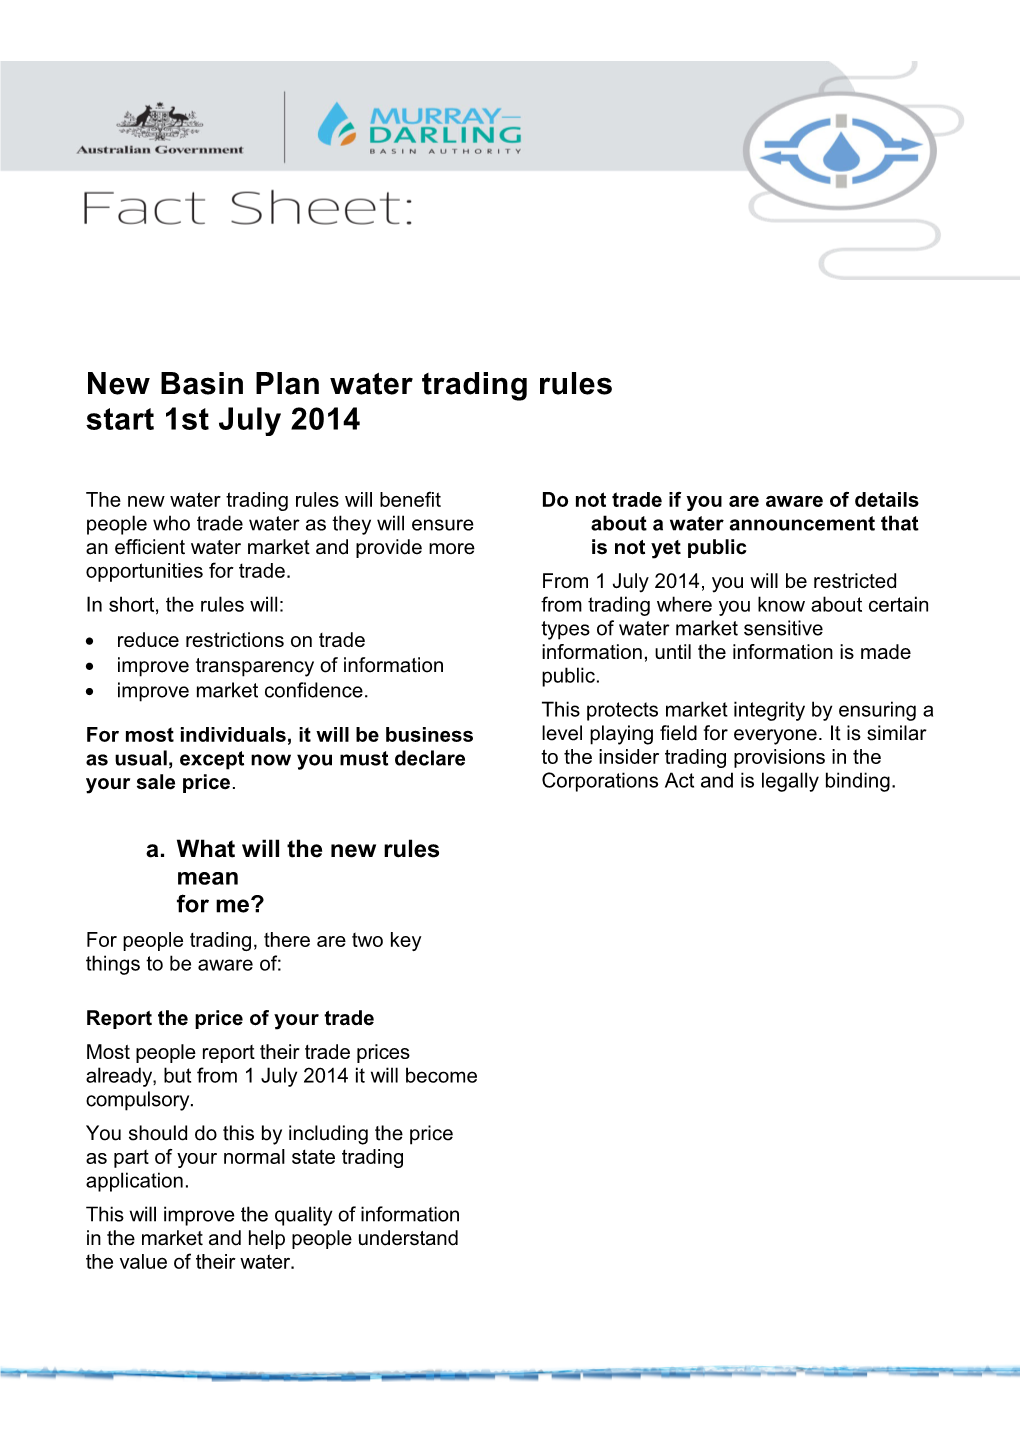 New Basin Plan Water Trading Rules Start 1St July2014